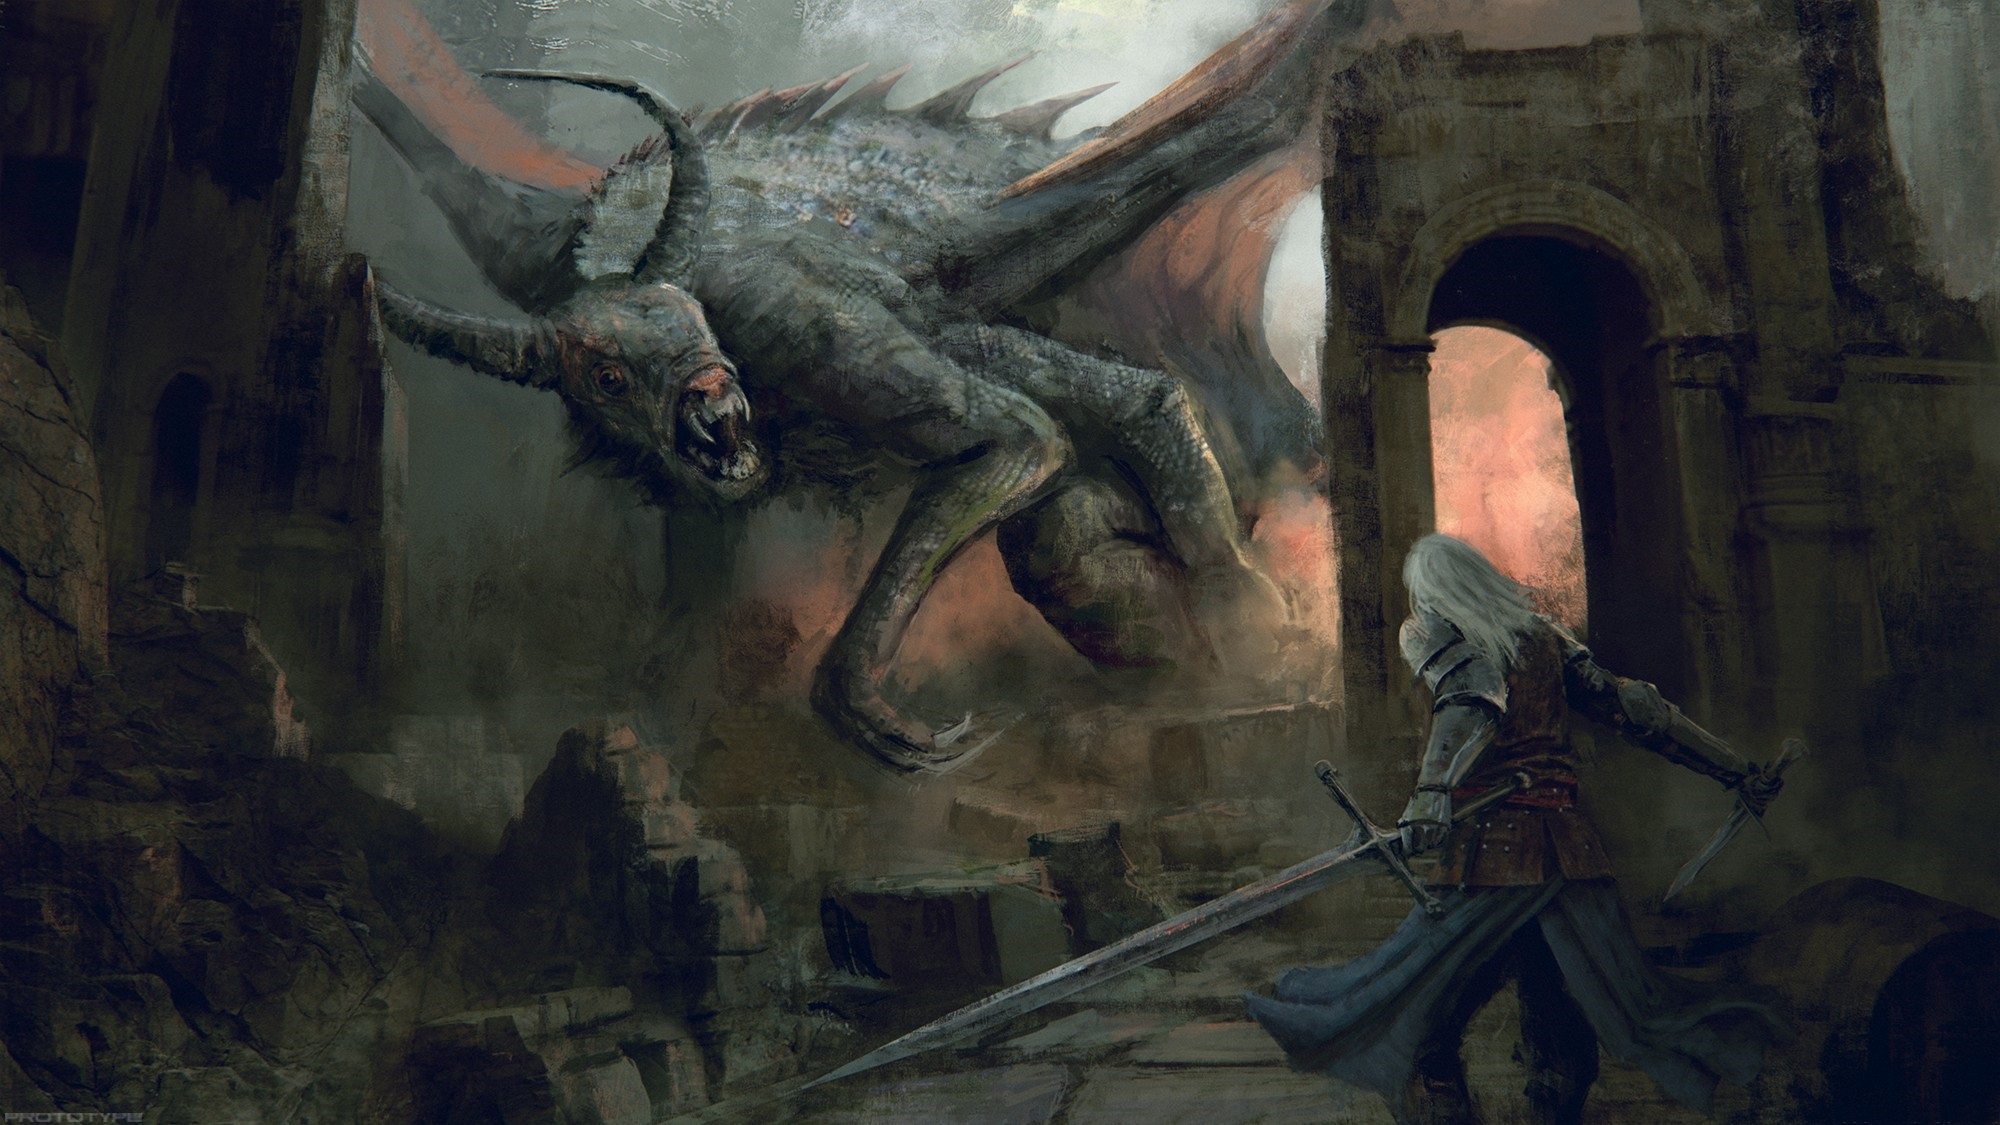 Warrior fighting a giant creepy monster HD Wallpaper